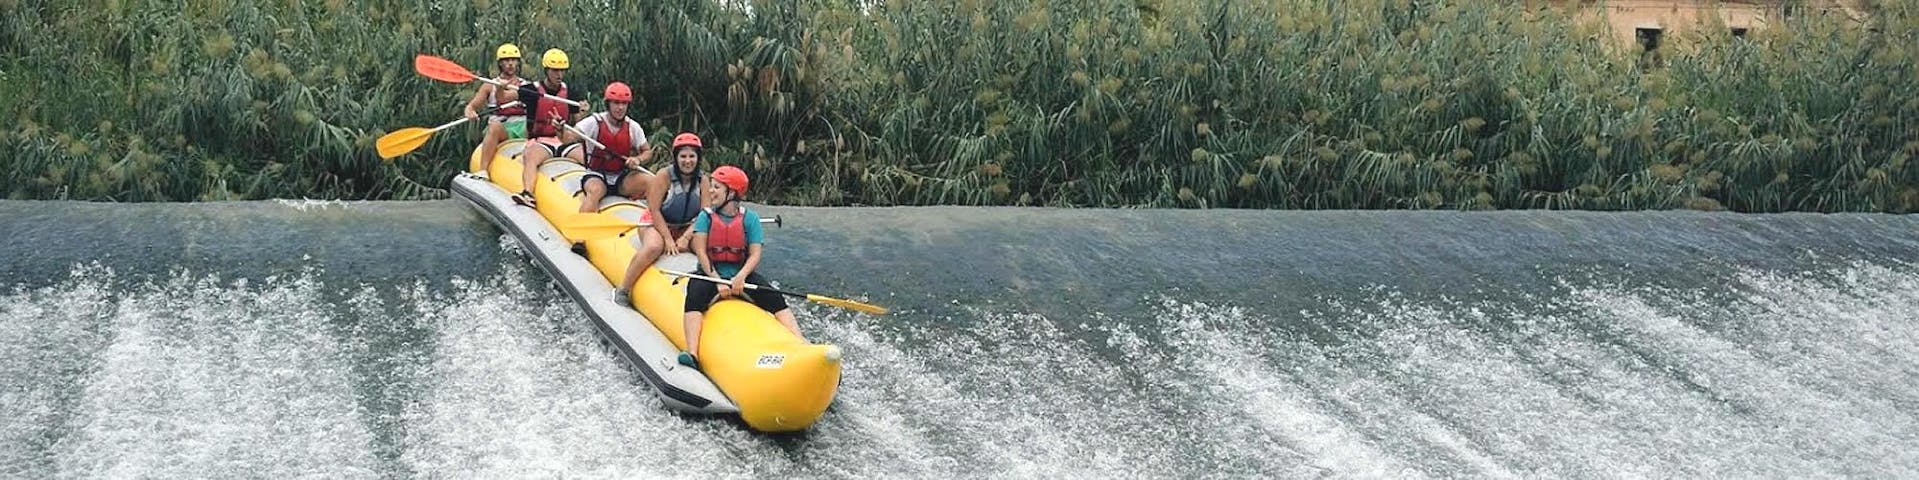 During the Rafting "Banana Boat" - Rio Segura, people are enjoying riding down the river on a unique boat under the supervision of an experienced rafting guide from Rafting Murcia.